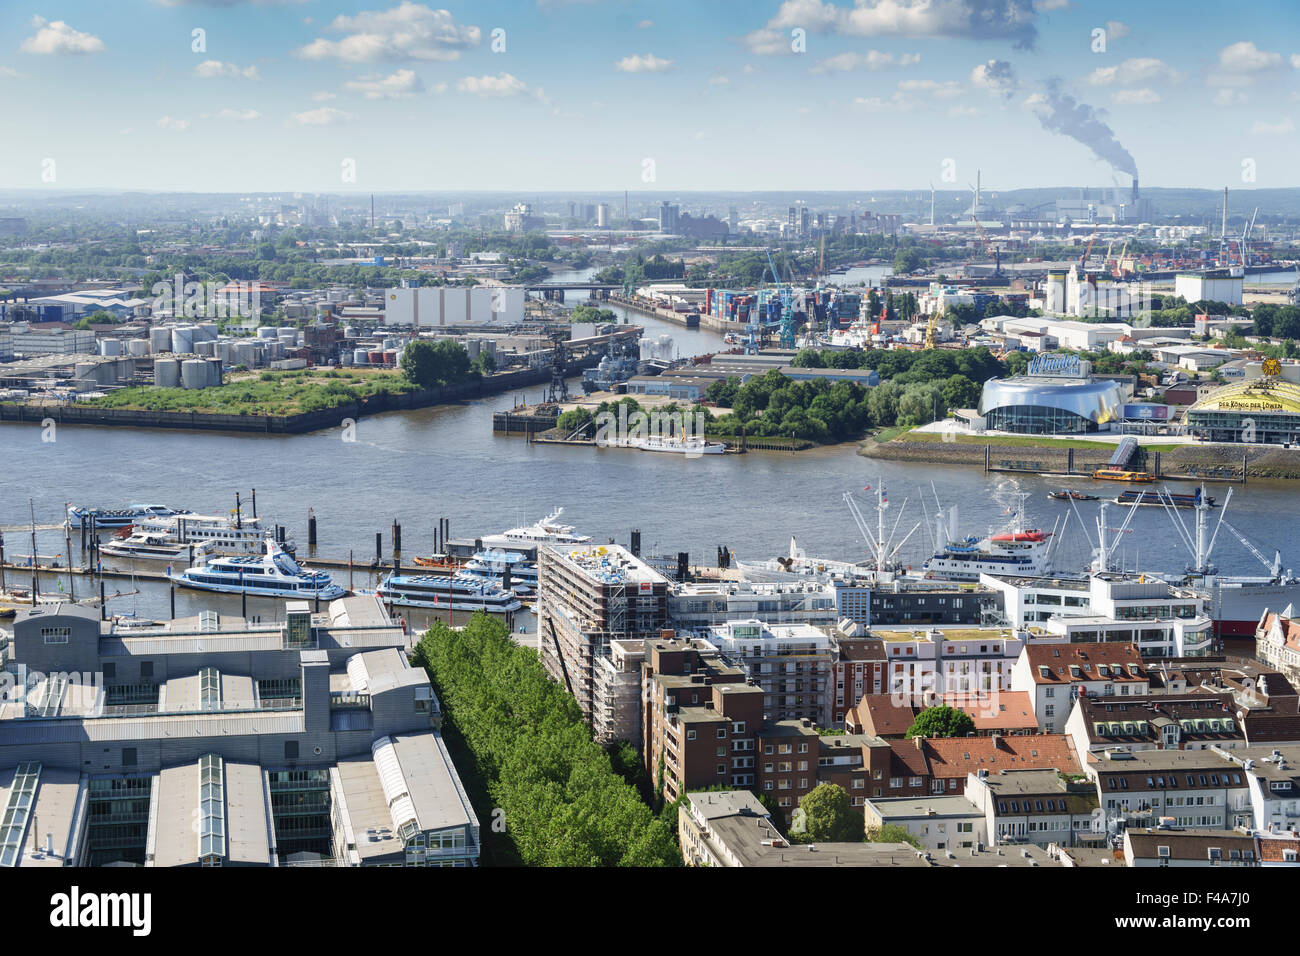 Hamburg, Germany - St Michael's Church. View across Elbe river to concert-theatre district and docks. Stock Photo